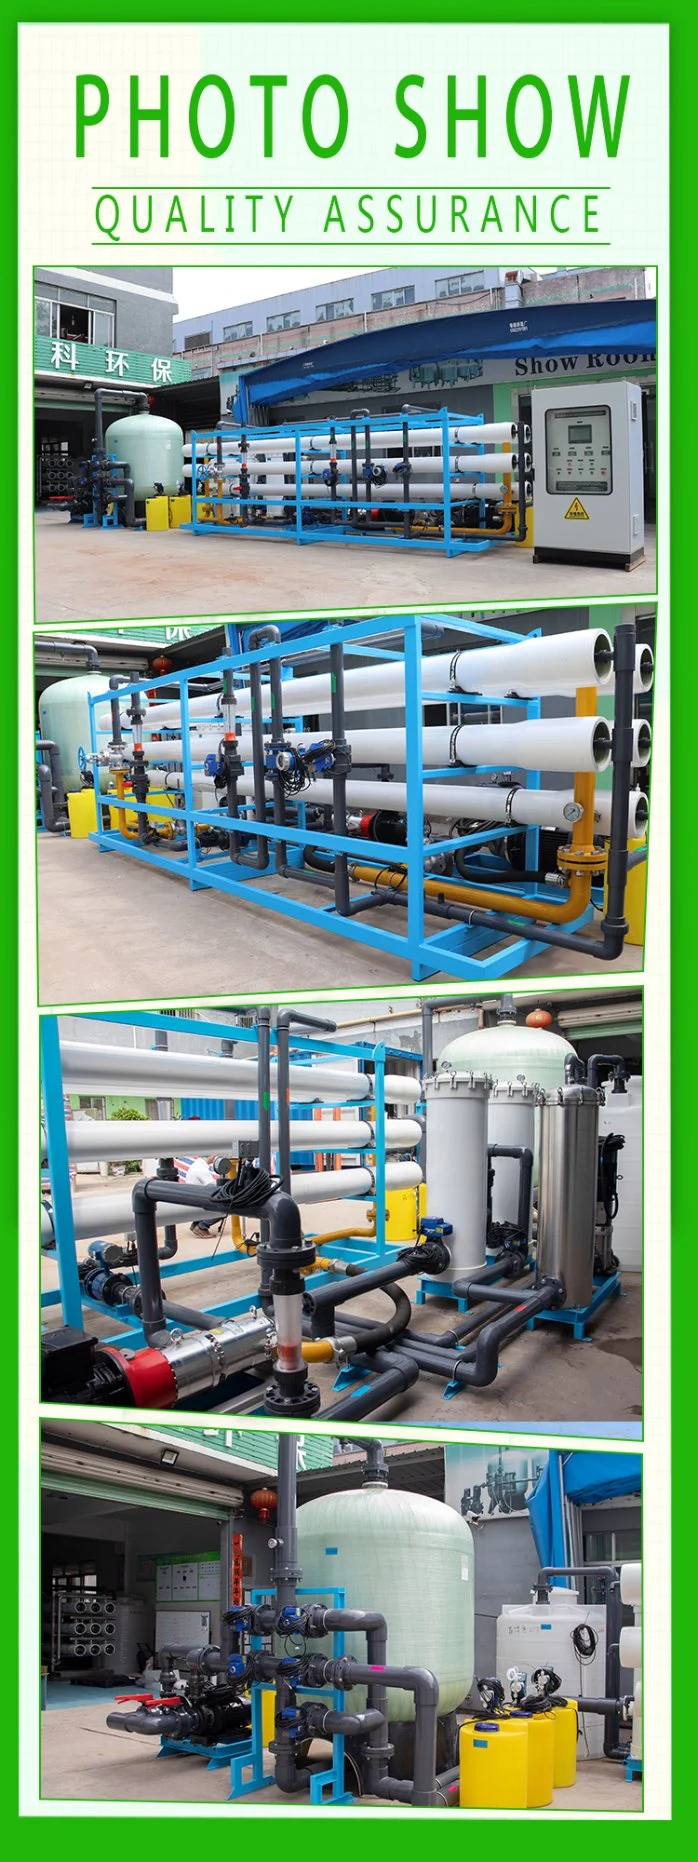 Water Purification Reverse Osimosis System Filter Drinking Pure Salty Water Desalination